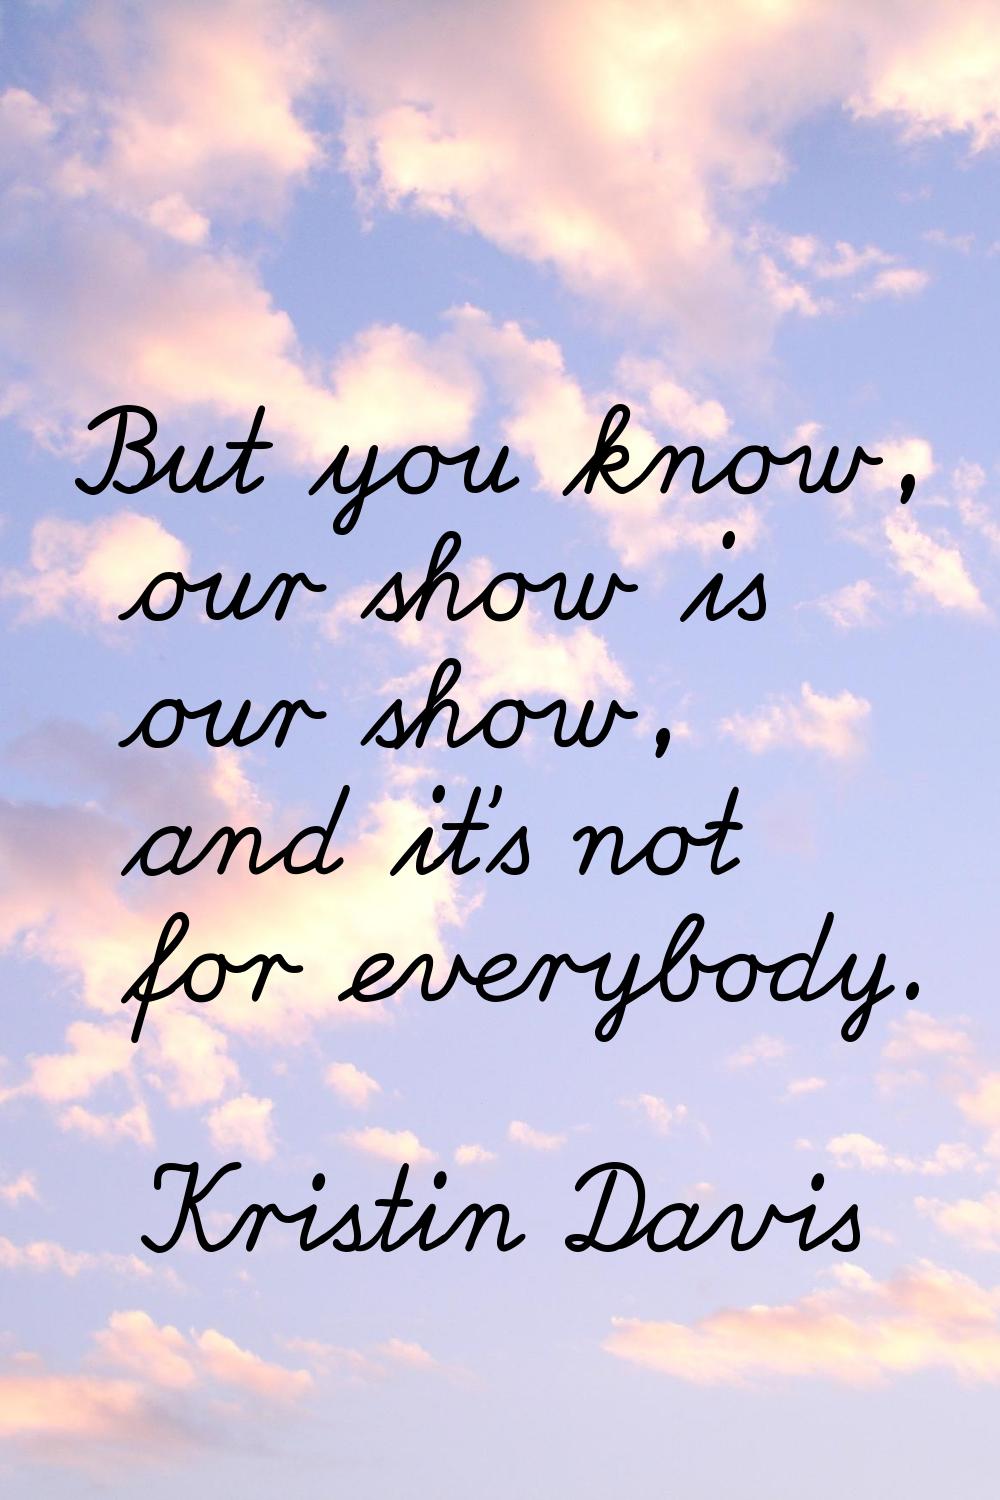 But you know, our show is our show, and it's not for everybody.